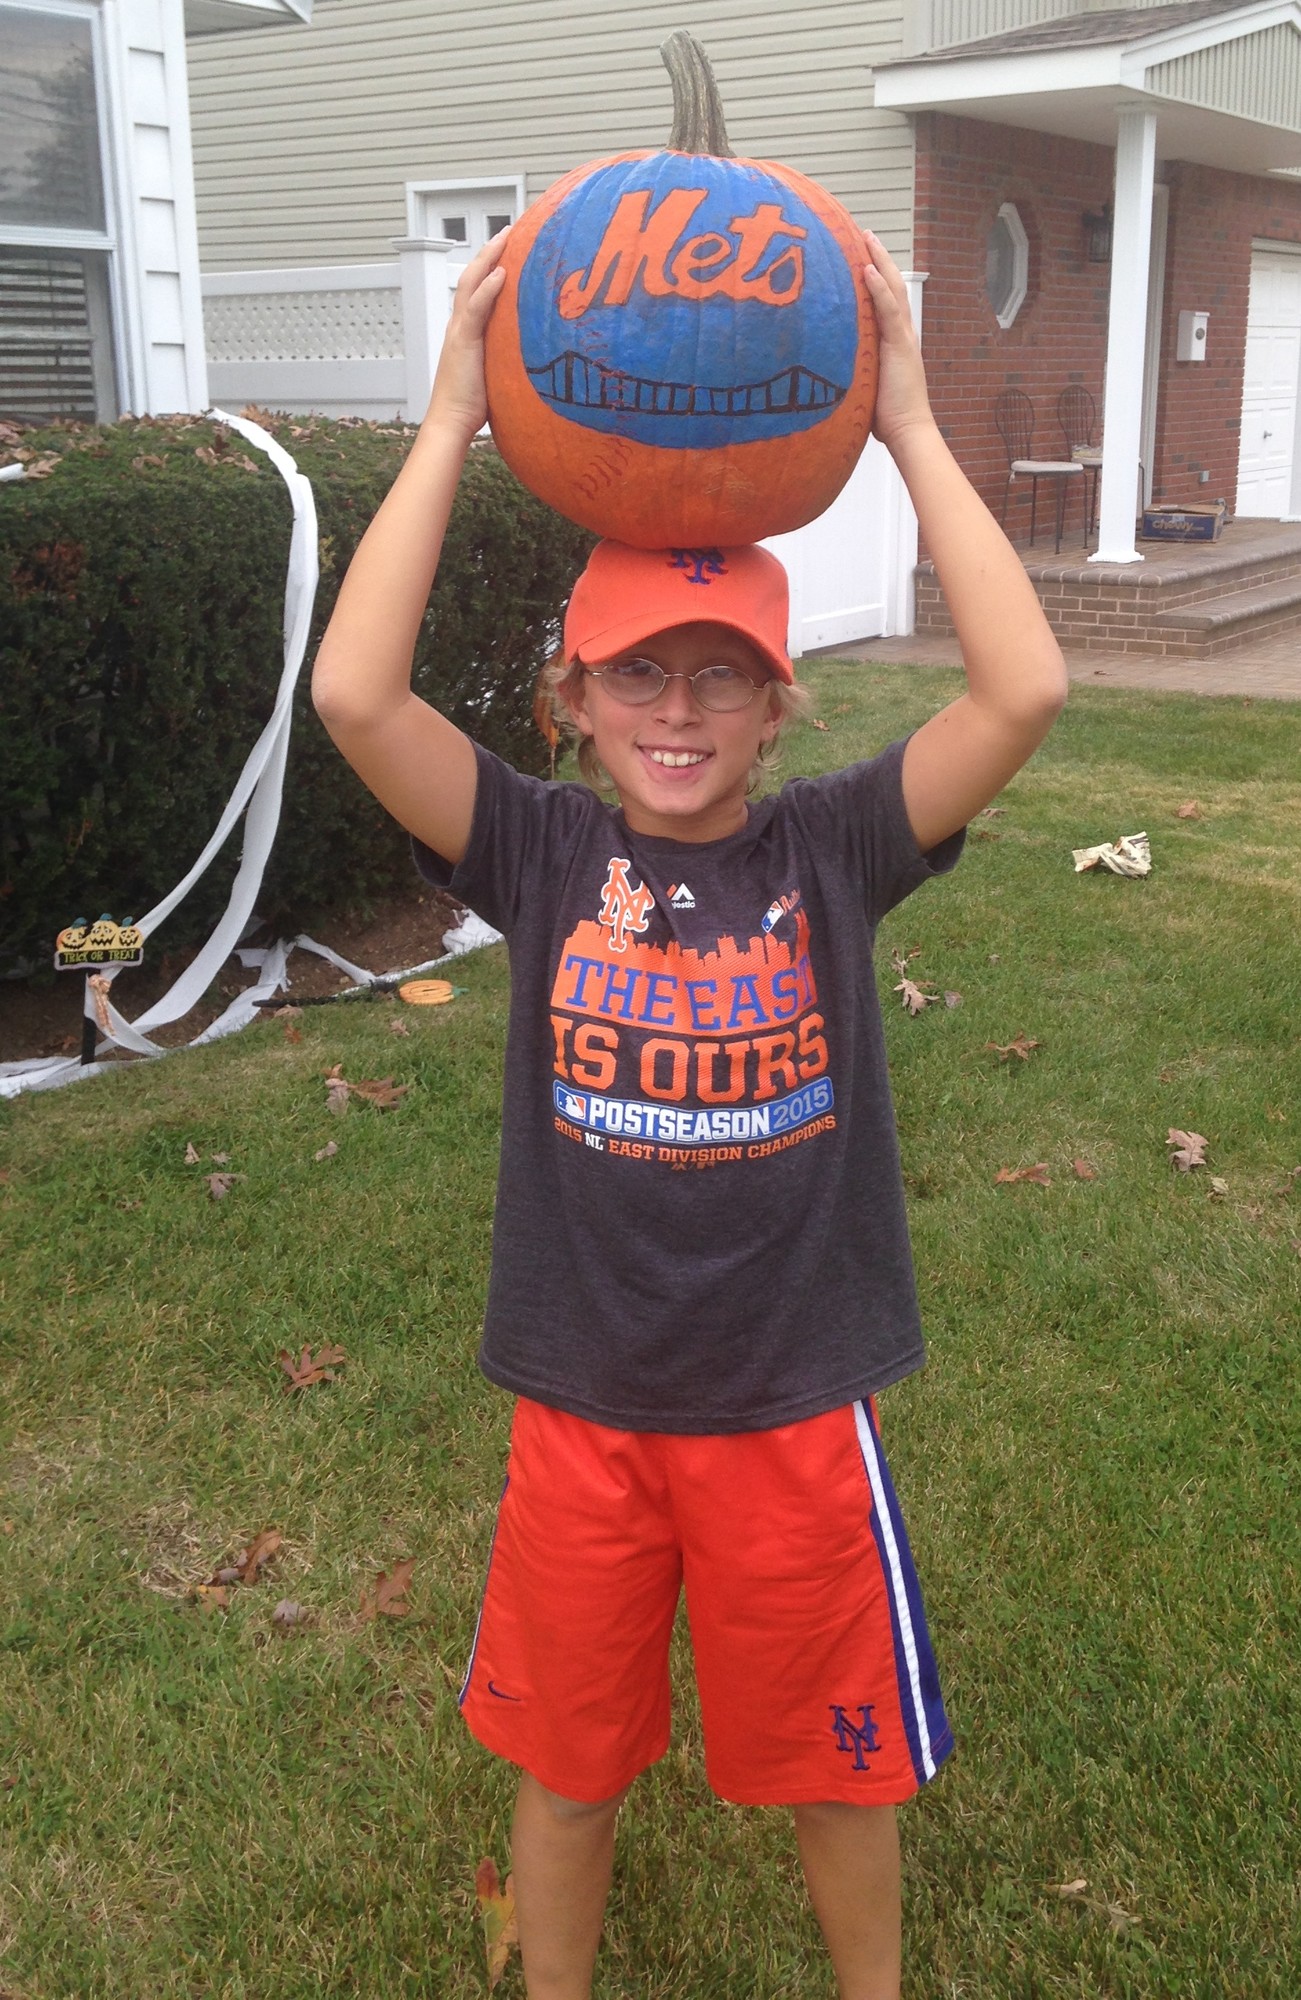 Myles Schnaier, 10, of Seaford, predicts the Mets will win the World Series.